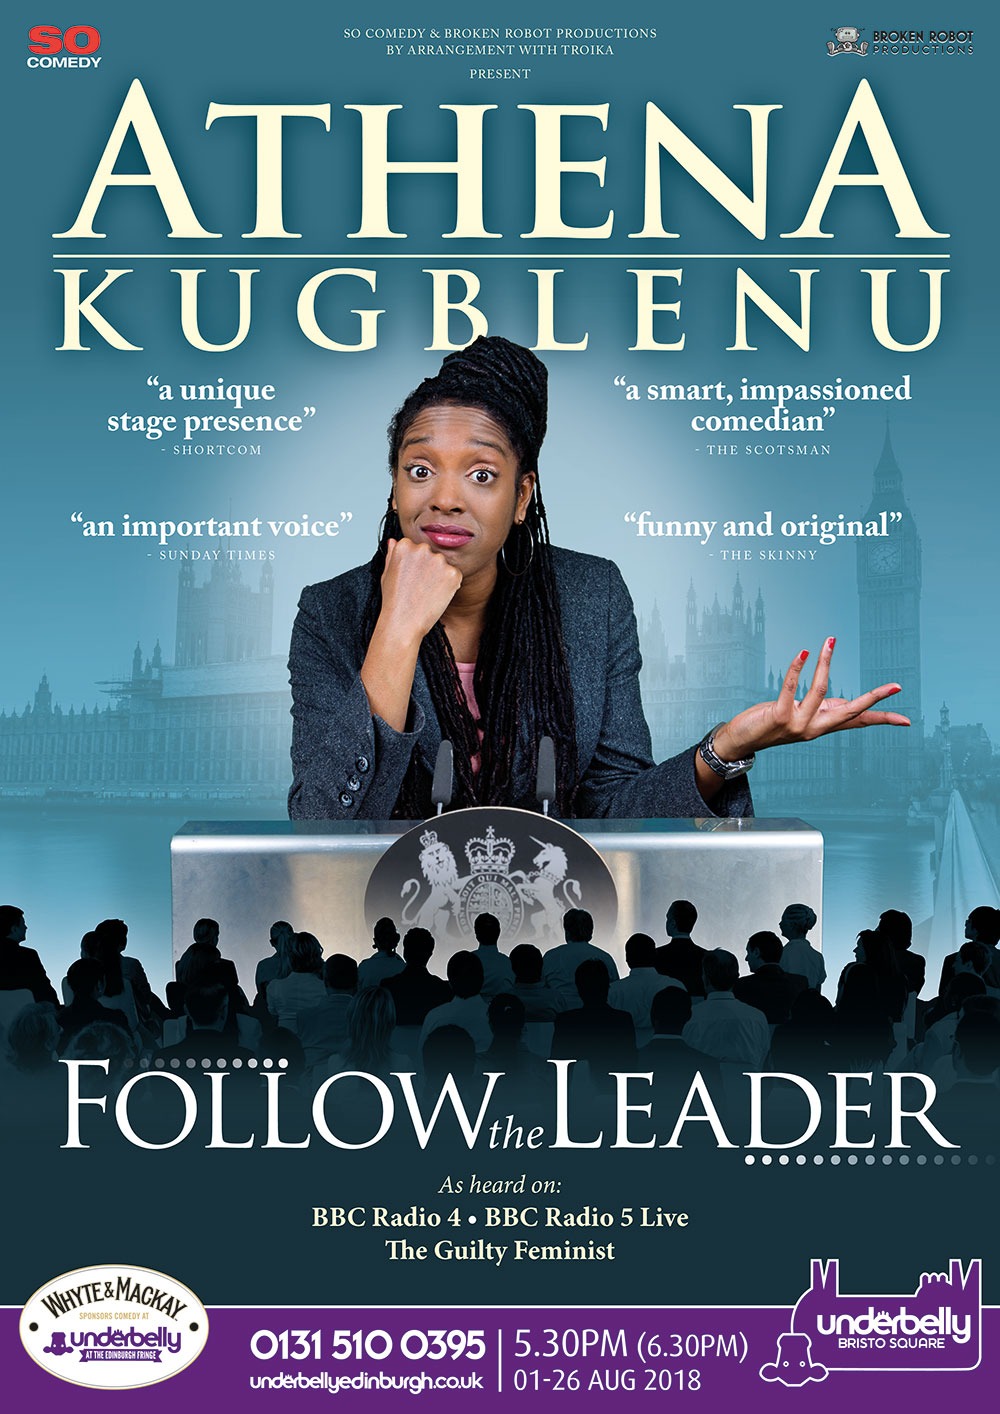 The poster for Athena Kugblenu: Follow The Leader